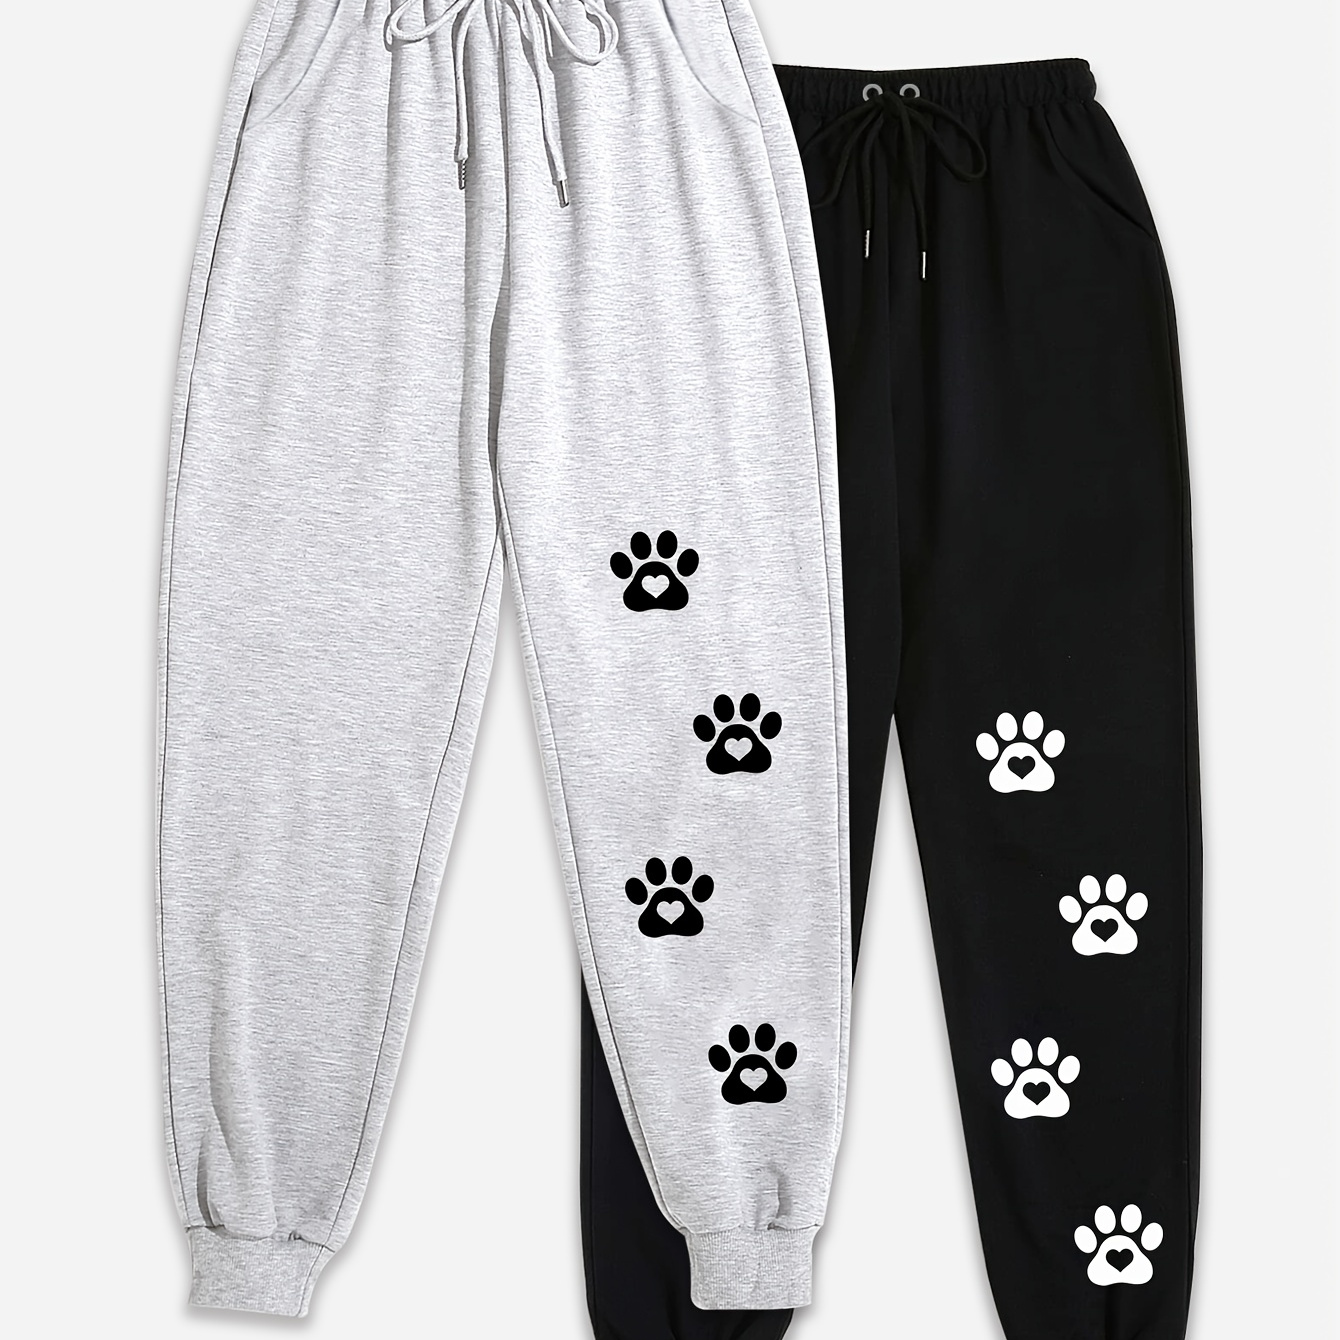 

Dog Foot Print Sweatpants 2 Pack, Drawstring Waist Comfy Casual Jogger Pants For Fall & Winter, Women's Clothing